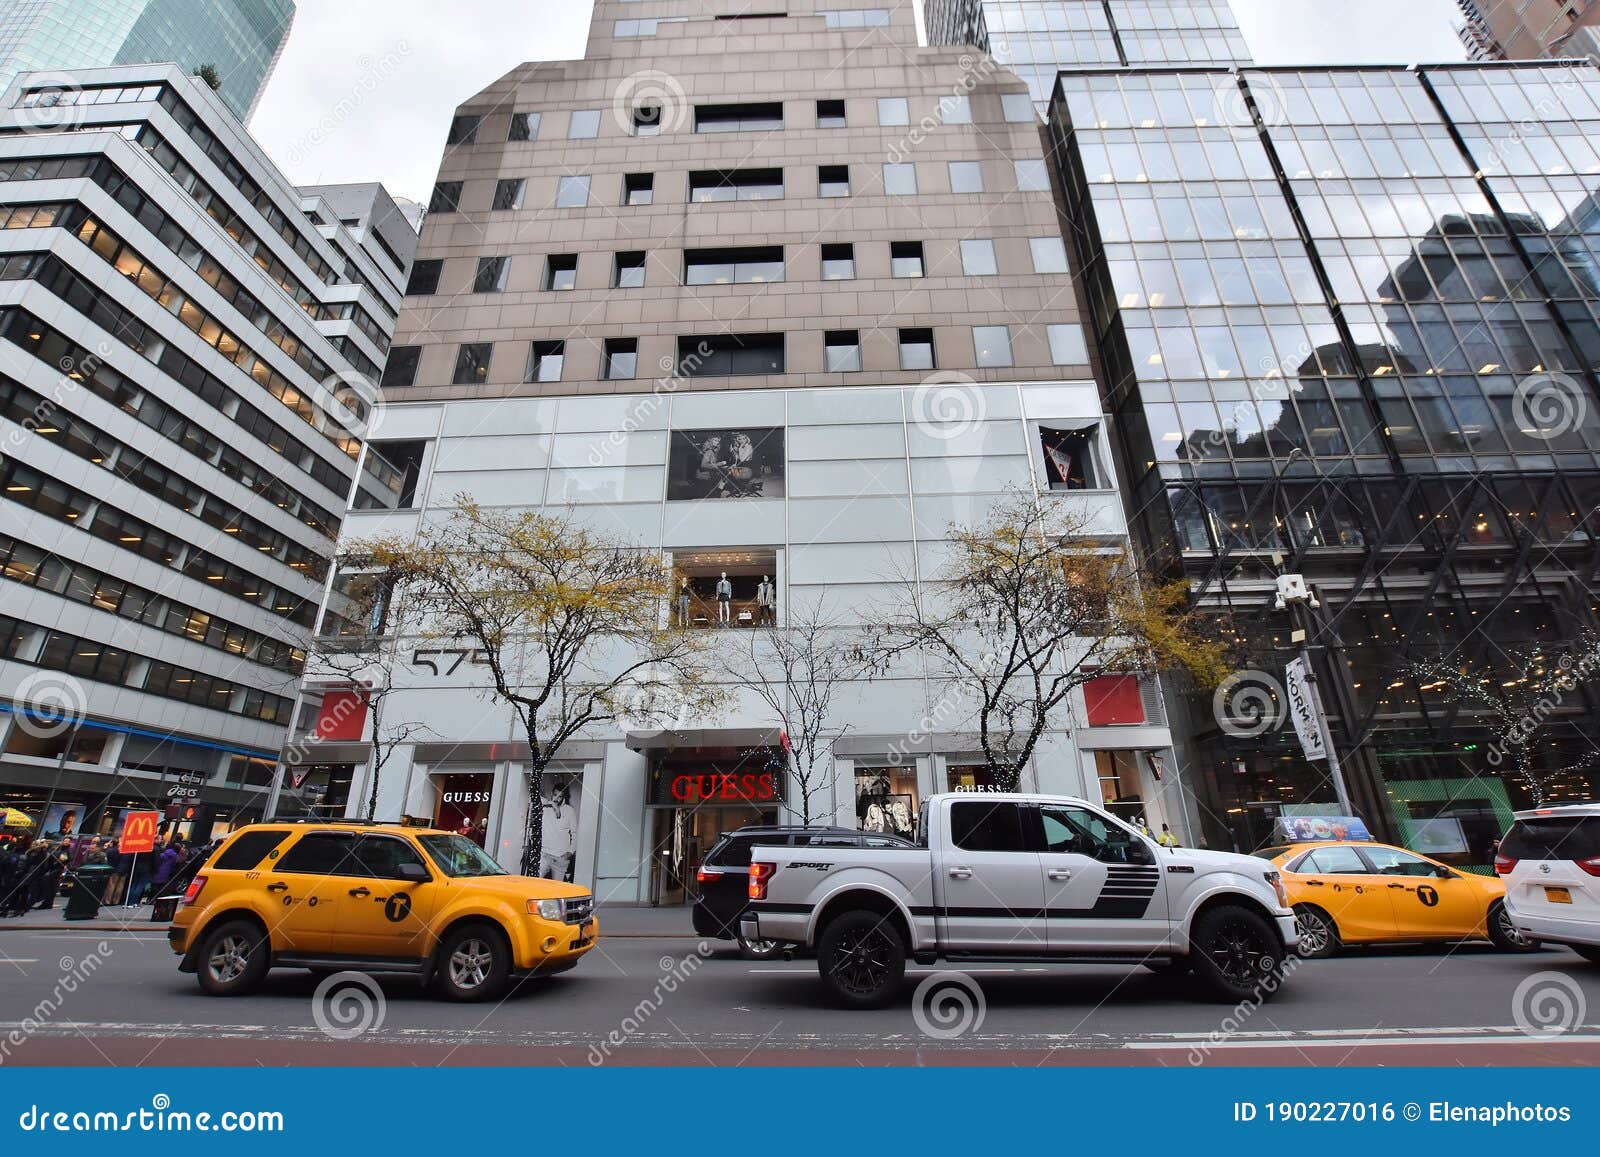 ortodoks flåde fredelig Fifth Avenue street view editorial photo. Image of downtown - 190227016